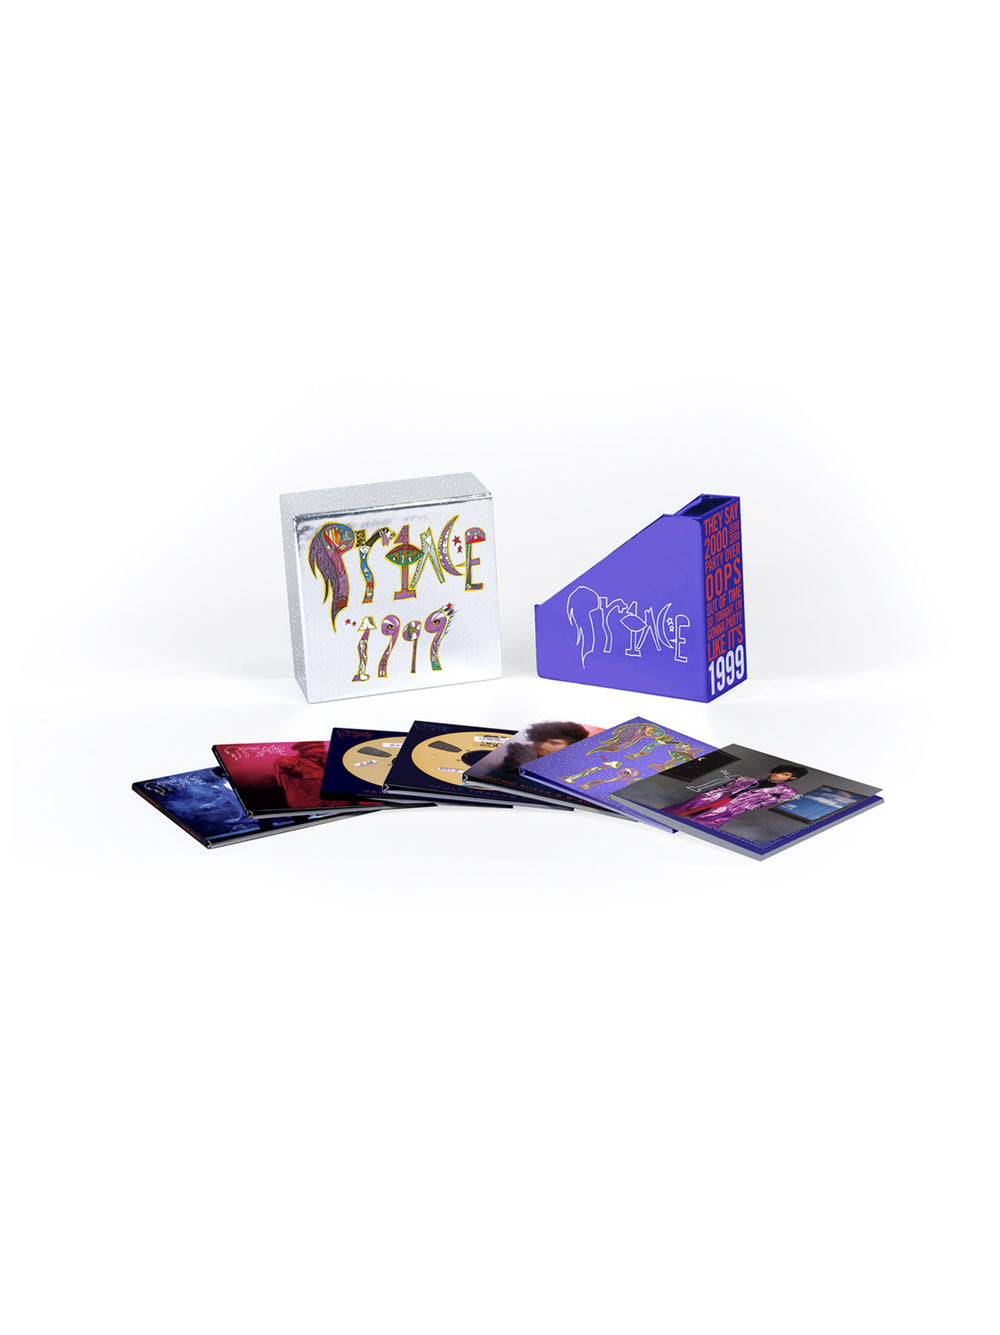 Prince – & The Revolution – 1999 Super Deluxe Edition 5 CD ALBUM+DVD AS NEW: 2019